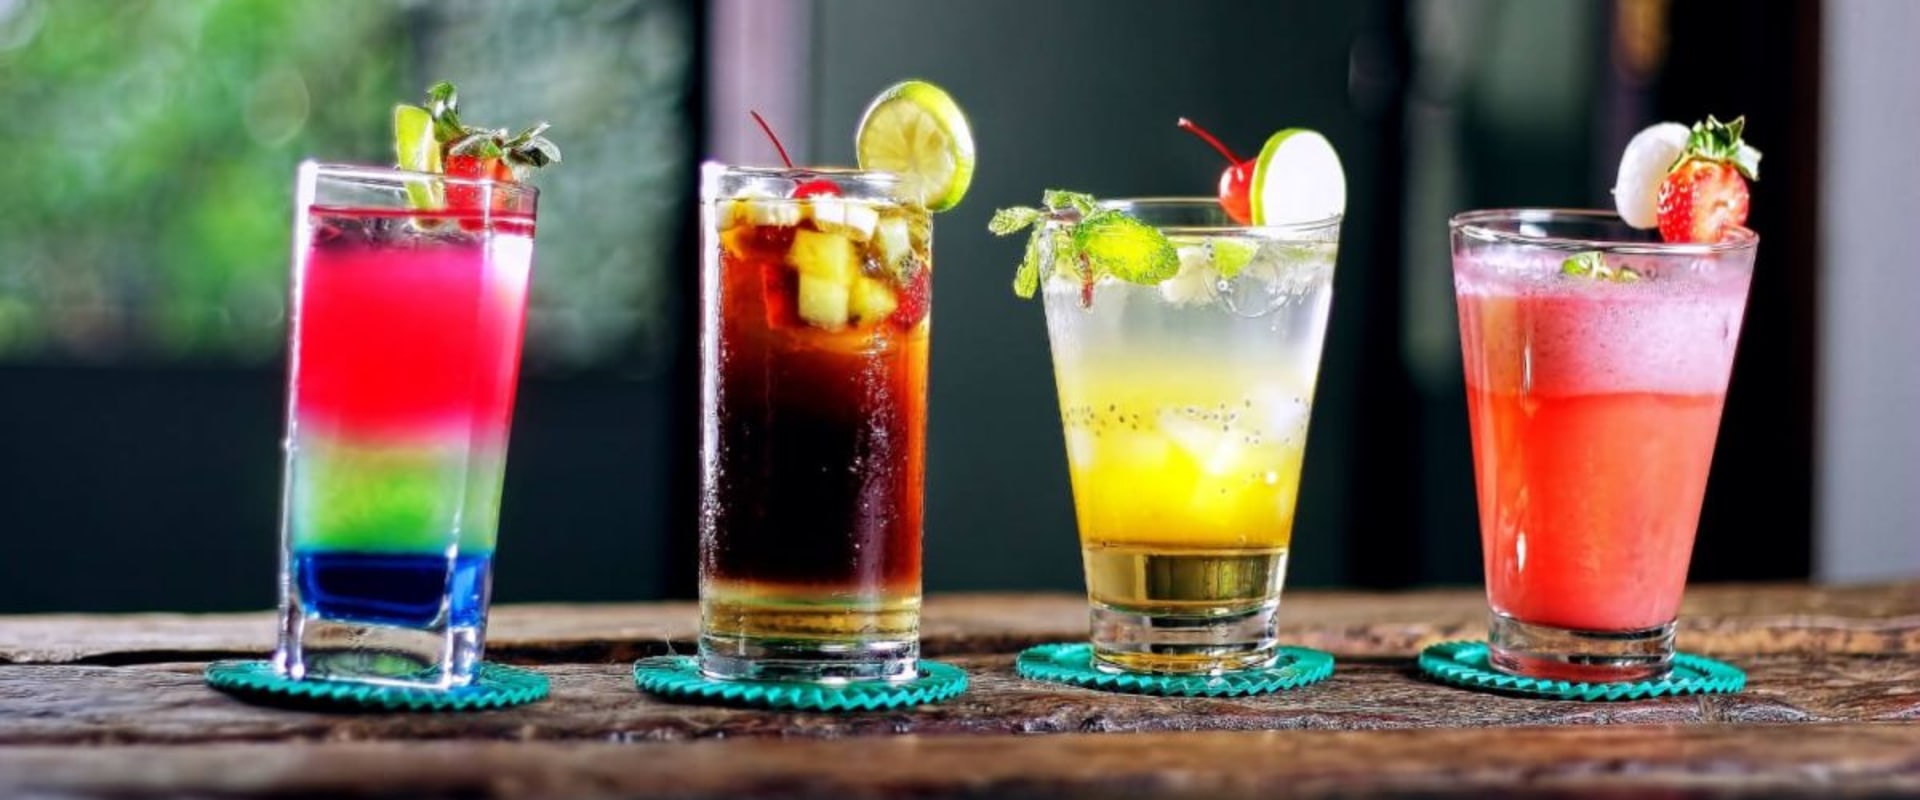 Garnishes for Bartenders: Essential Ornaments for Success